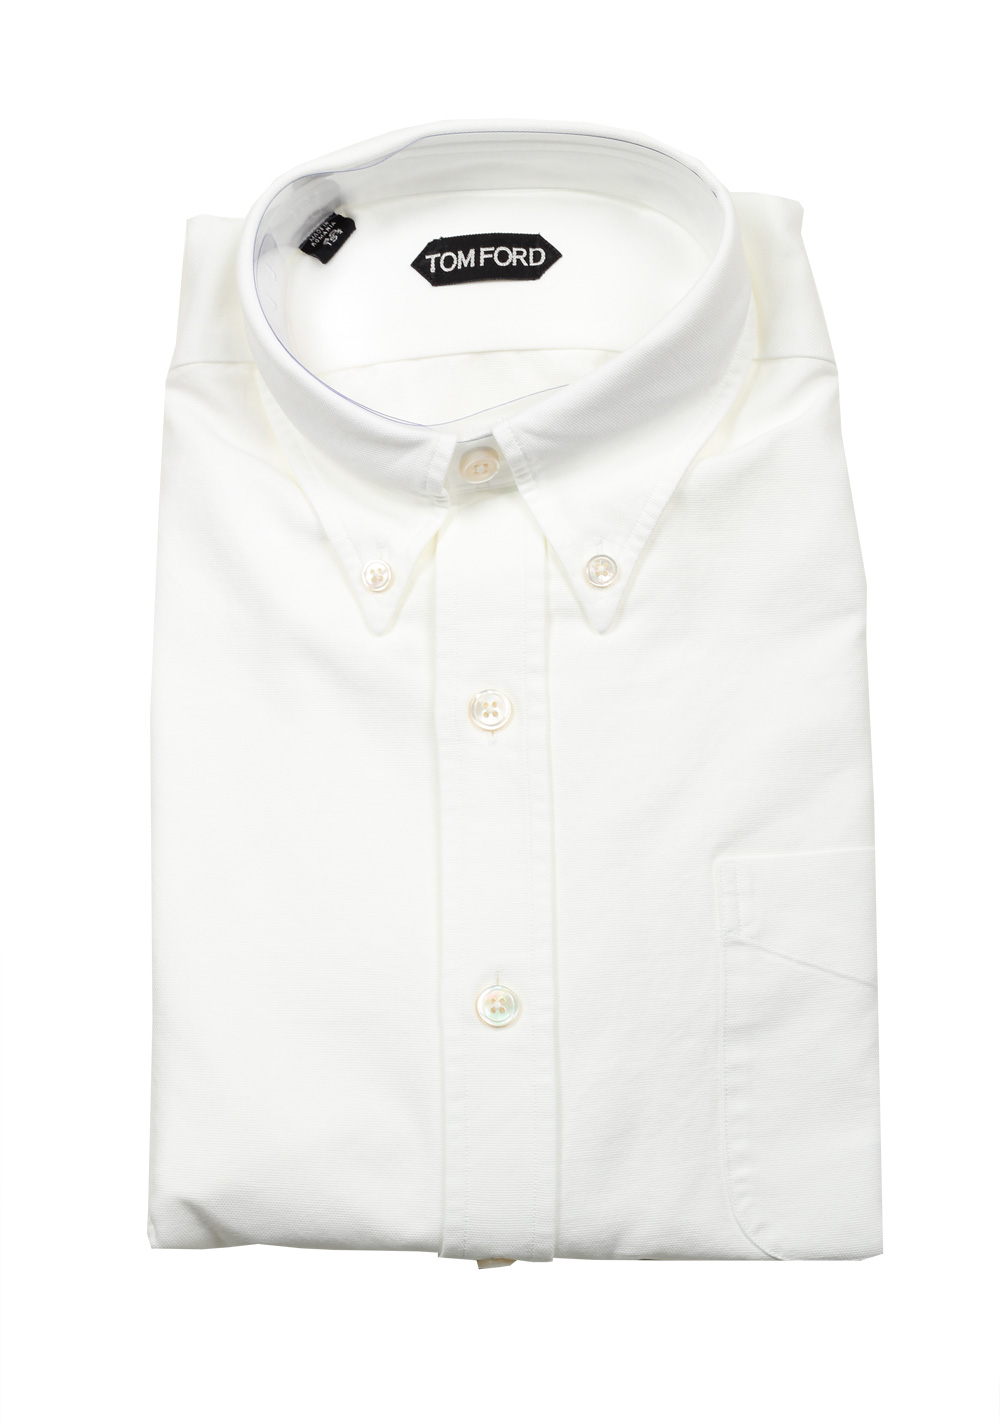 TOM FORD Solid White Casual Button Down Shirt Size 40 / 15,75 U.S ...